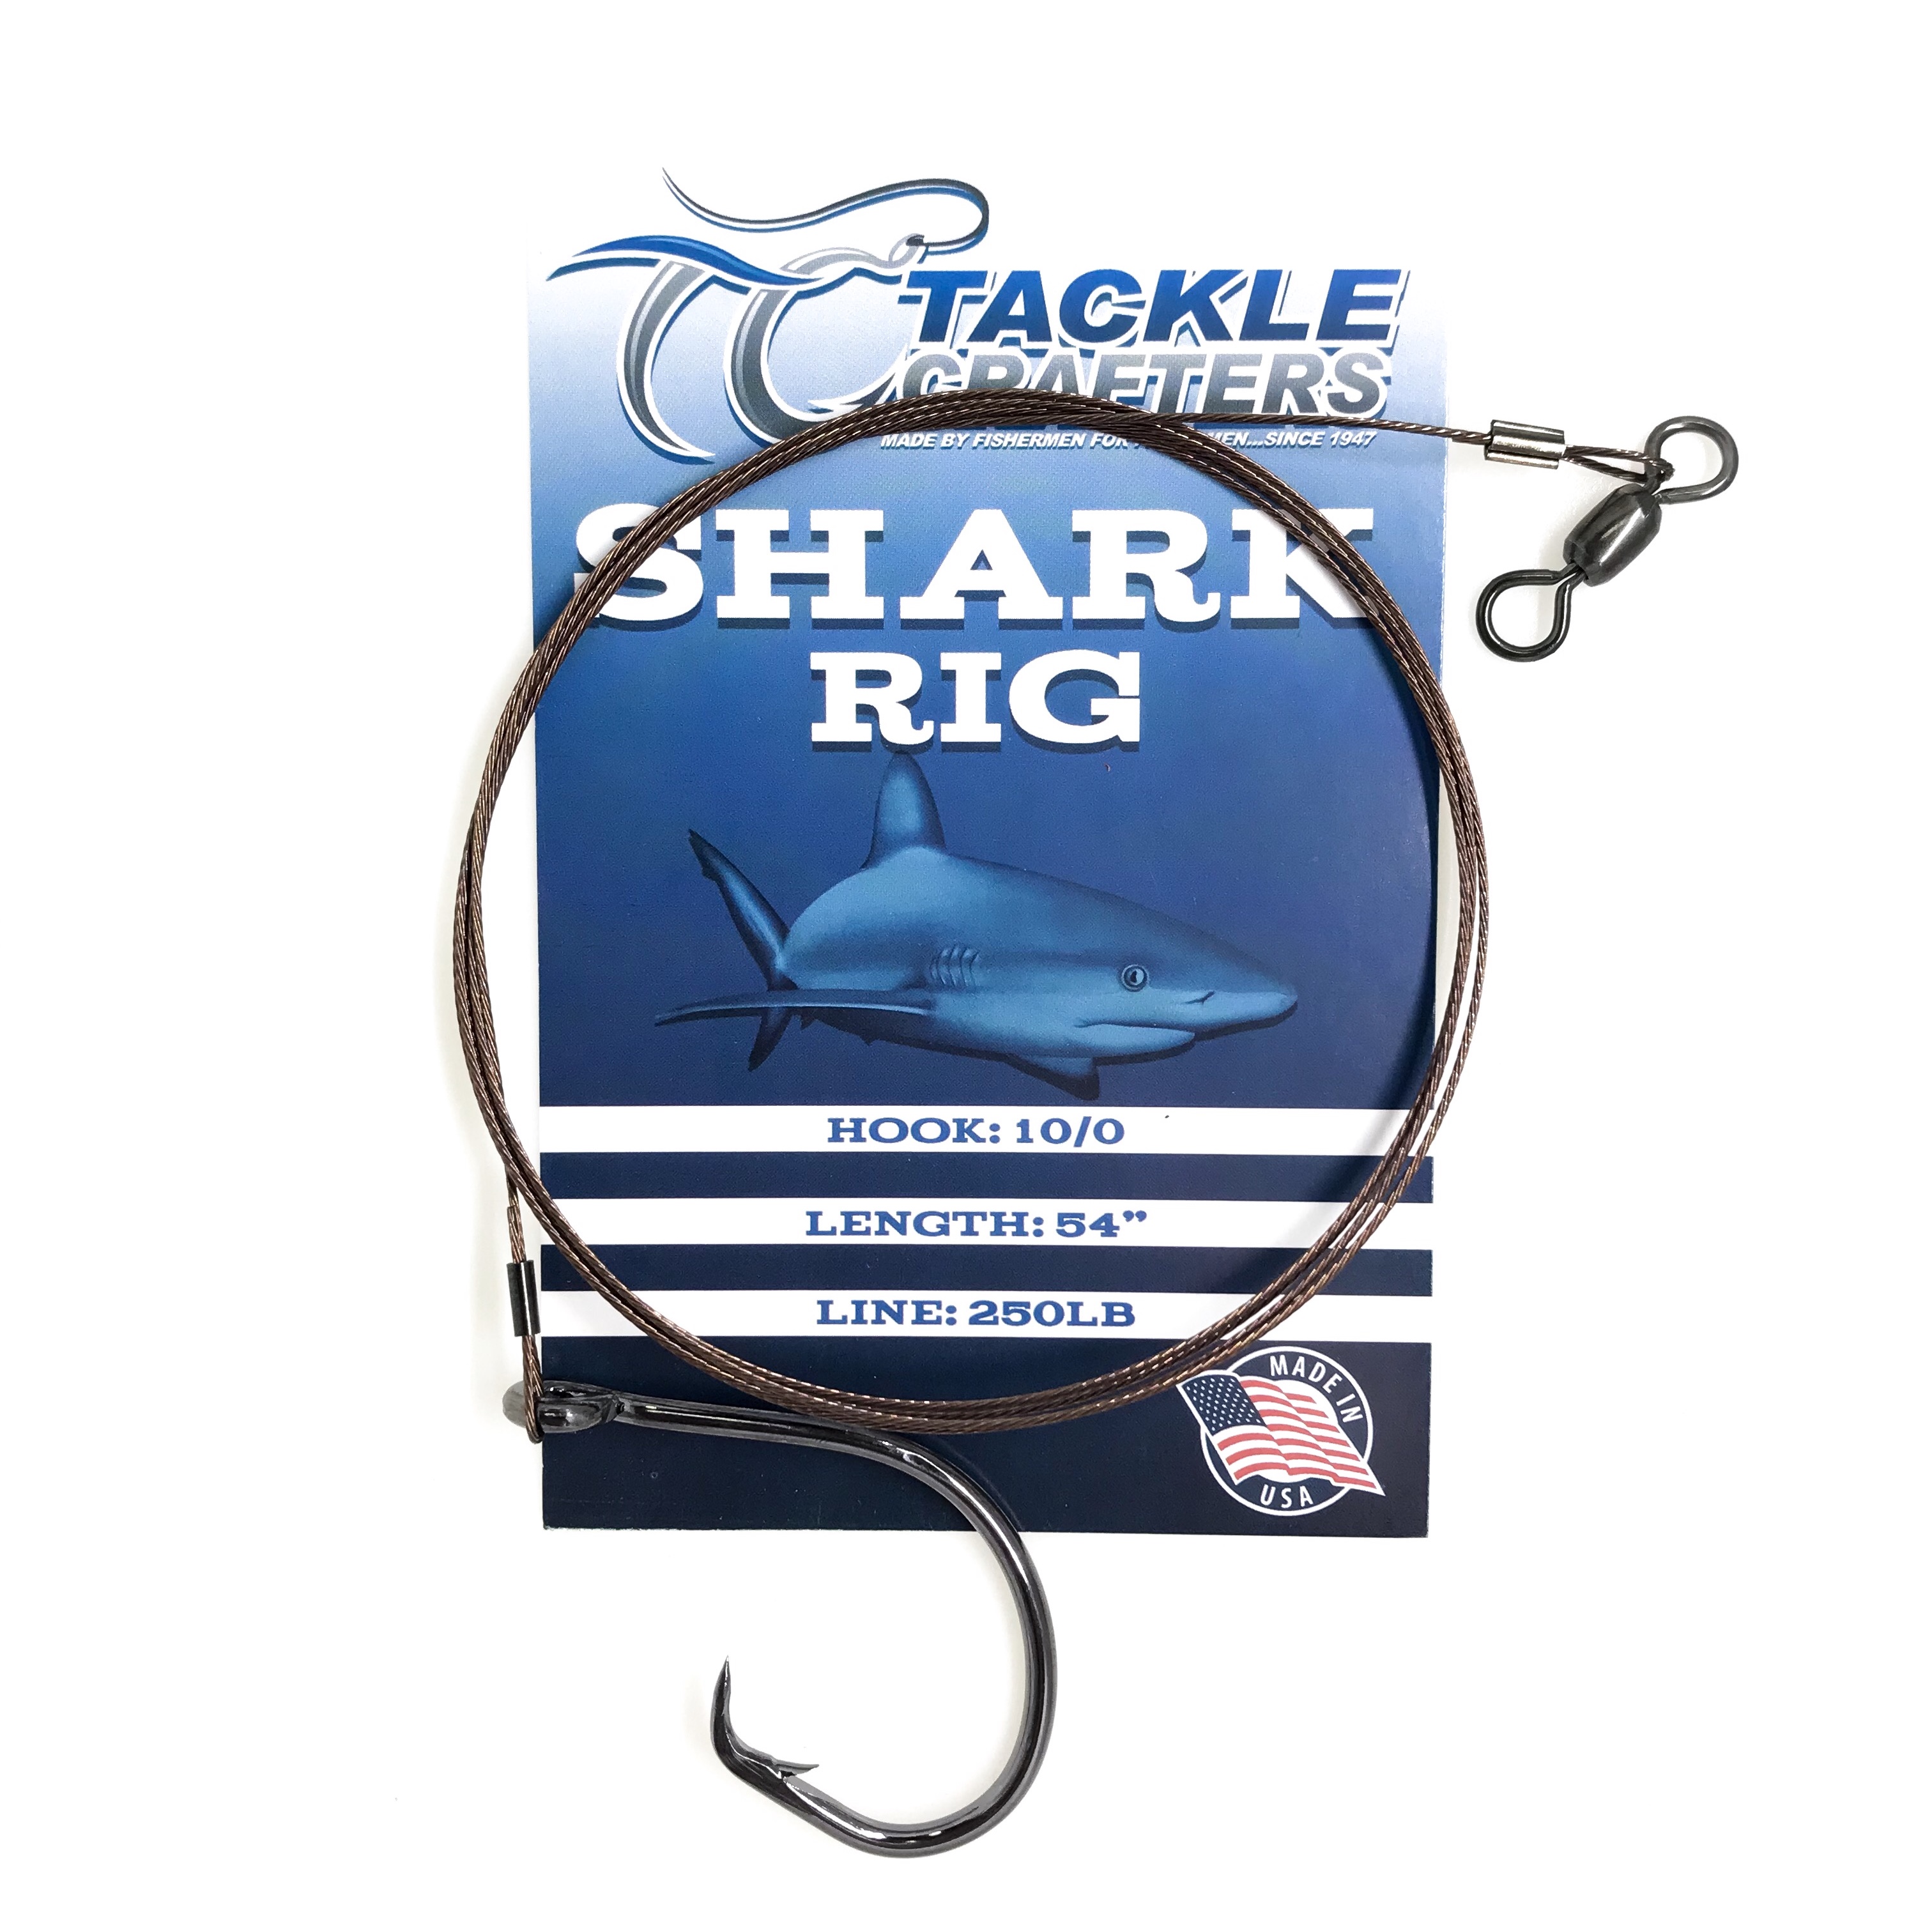 Shark Rig  Tackle Crafters